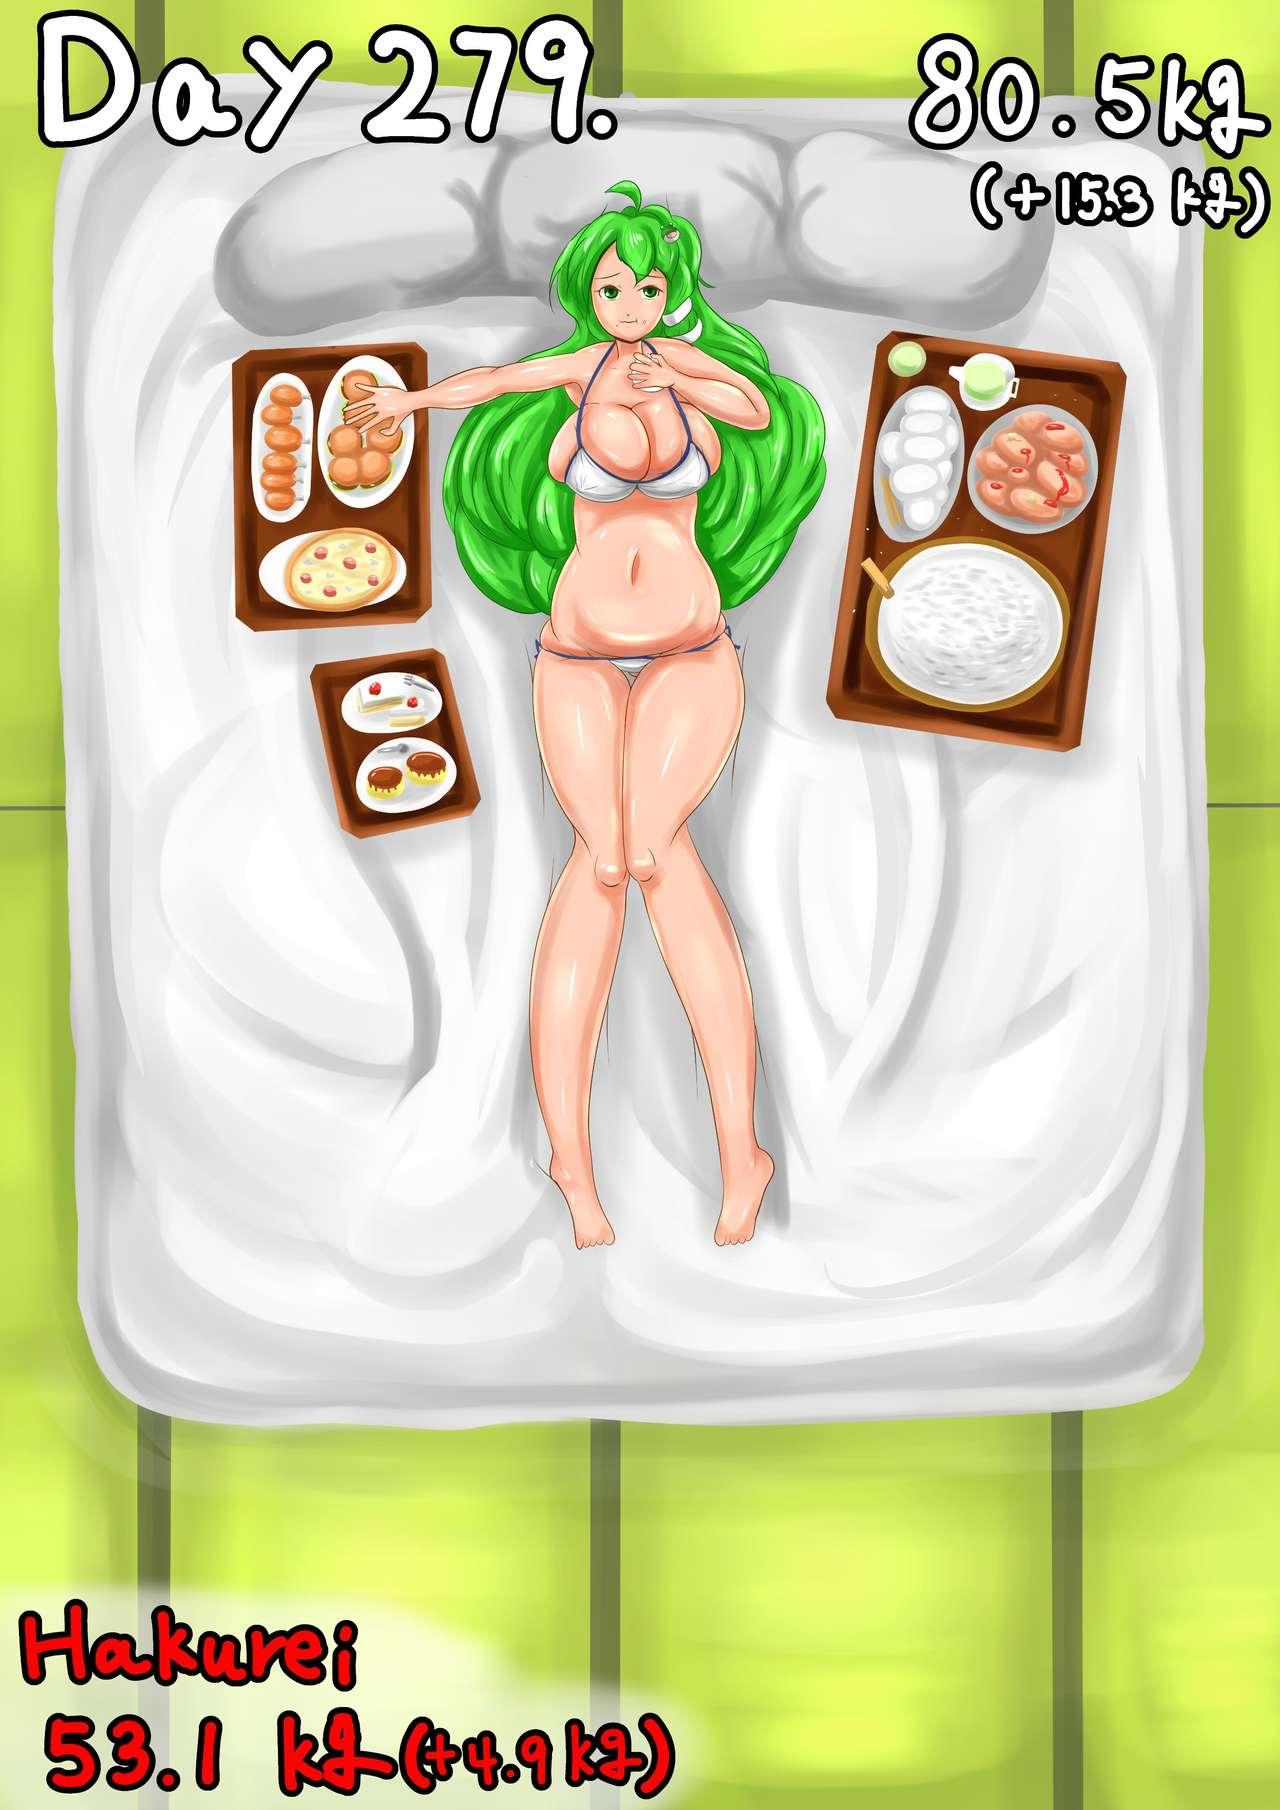 Self-feeding with Sanae. From default to lump 3